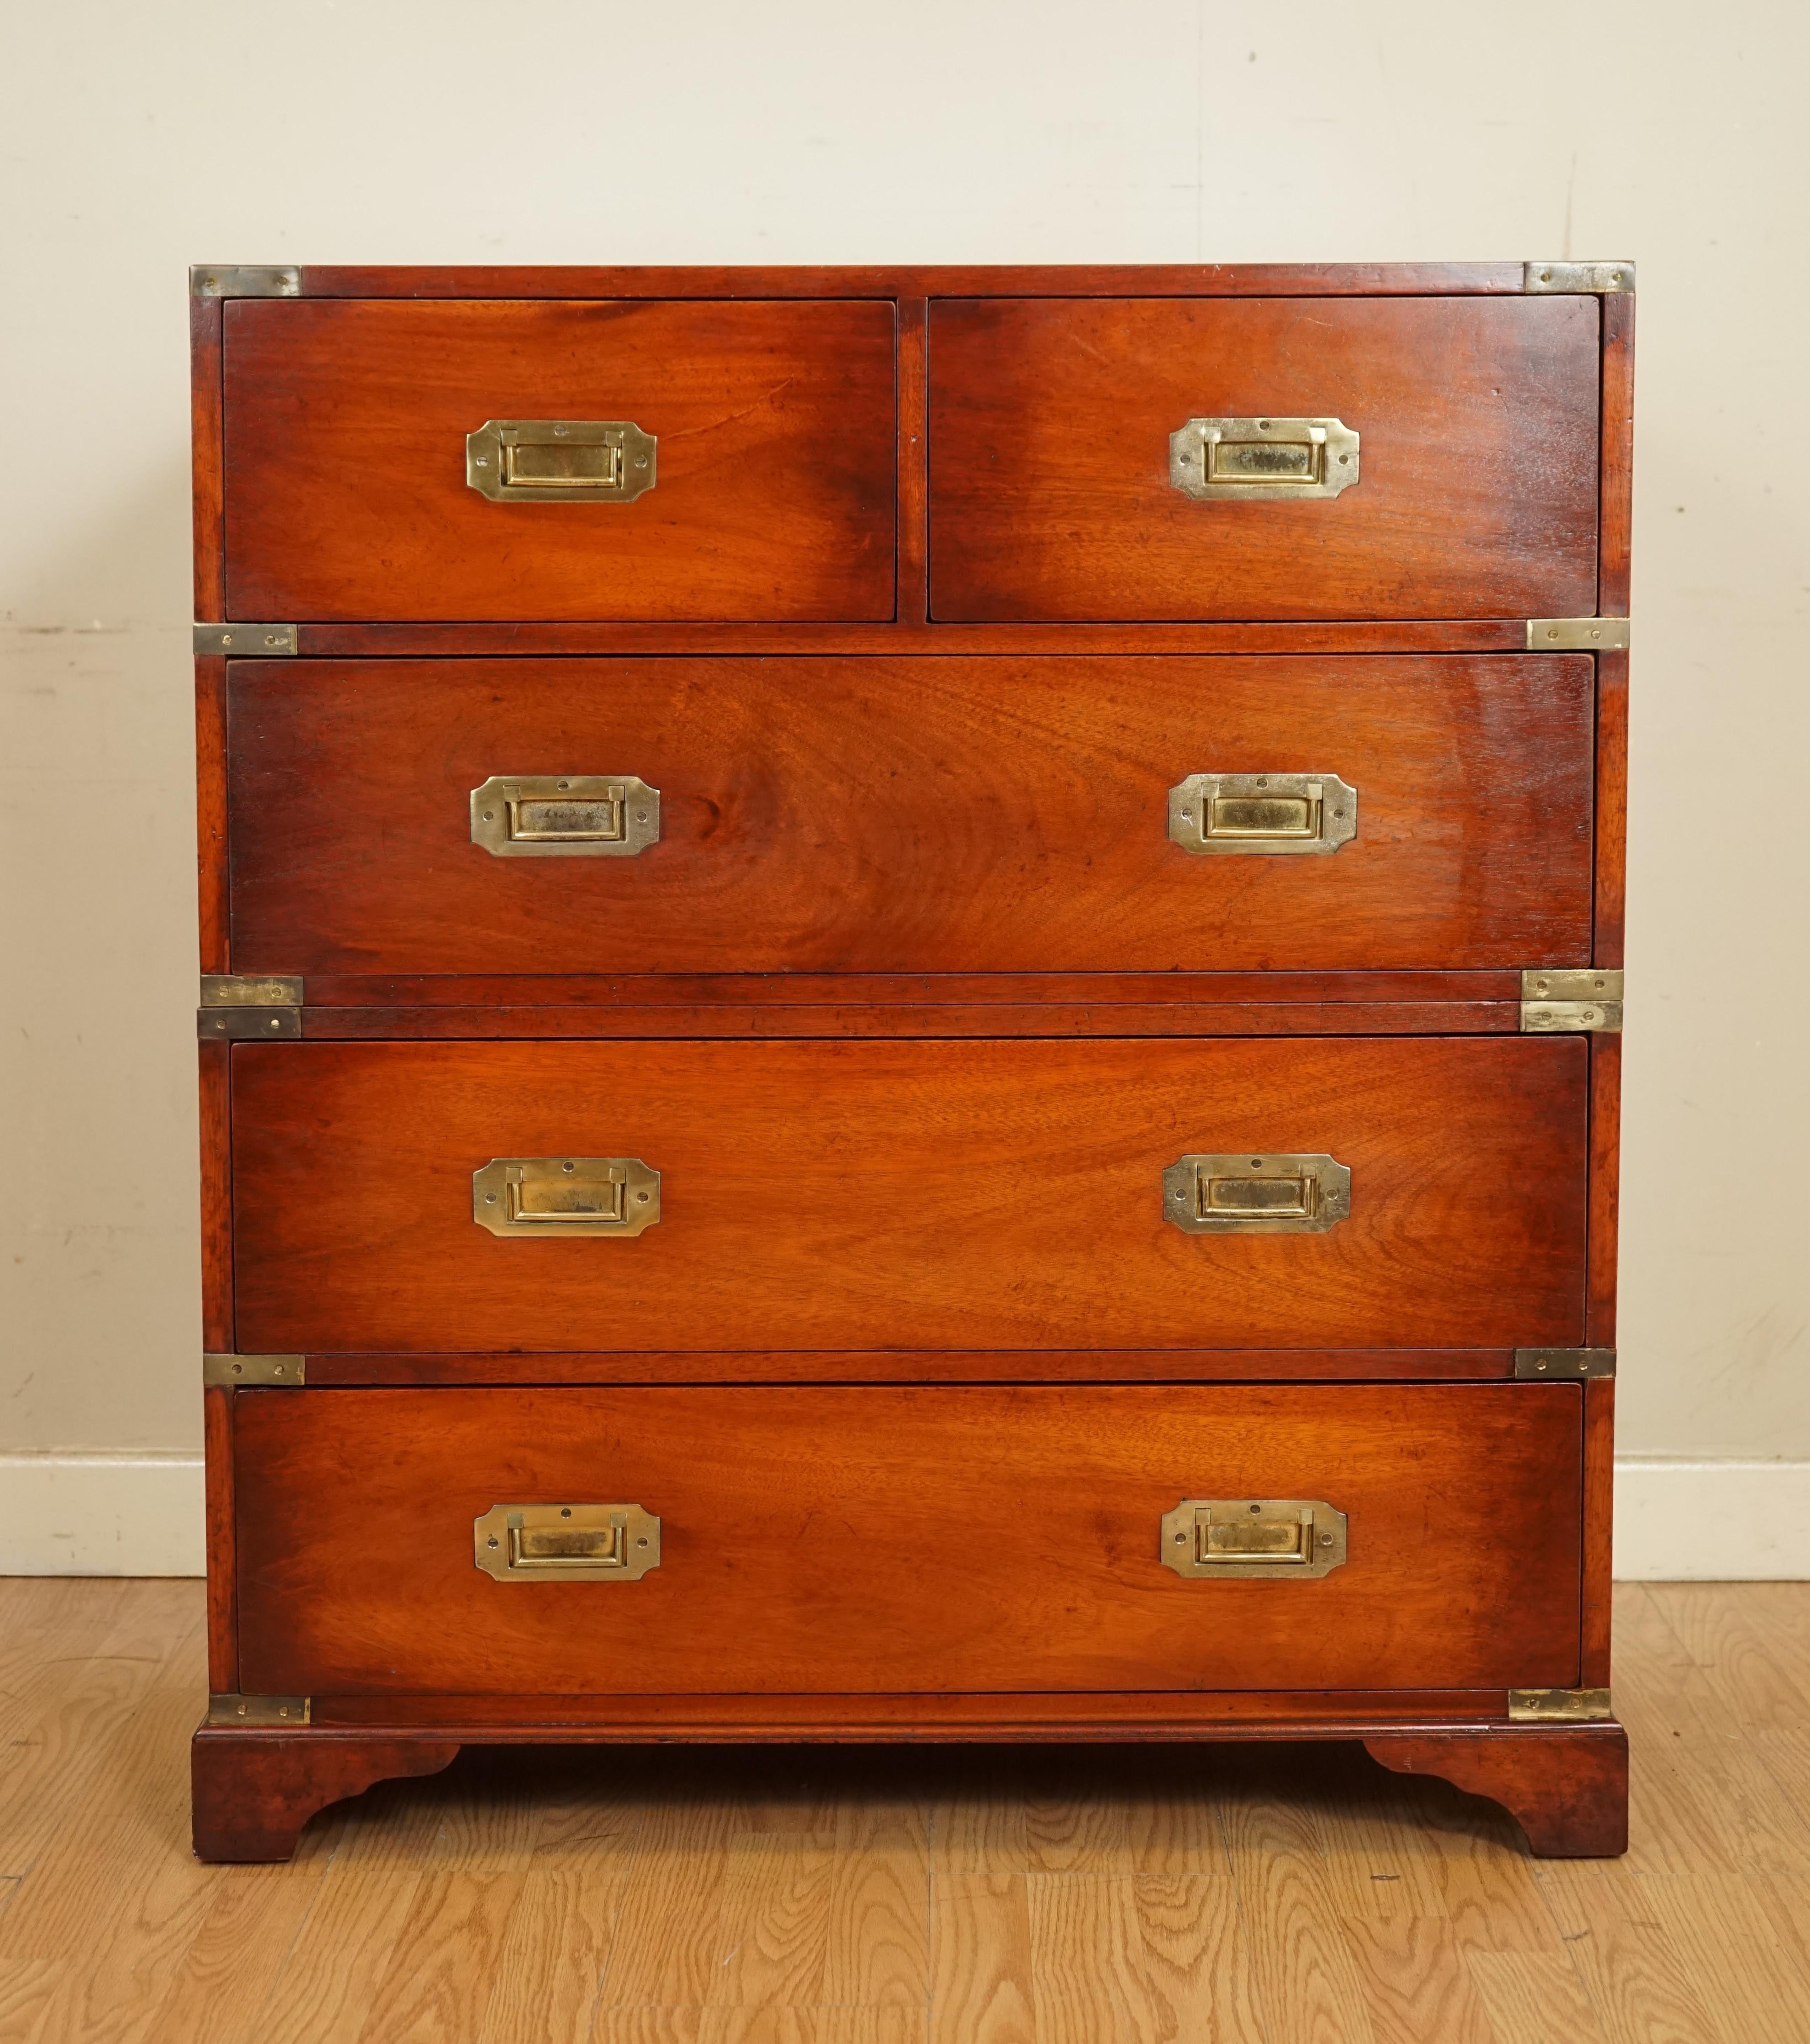 Hand-Crafted Lovely Vintage Military Campaign Chest of Drawers Brass Fittings